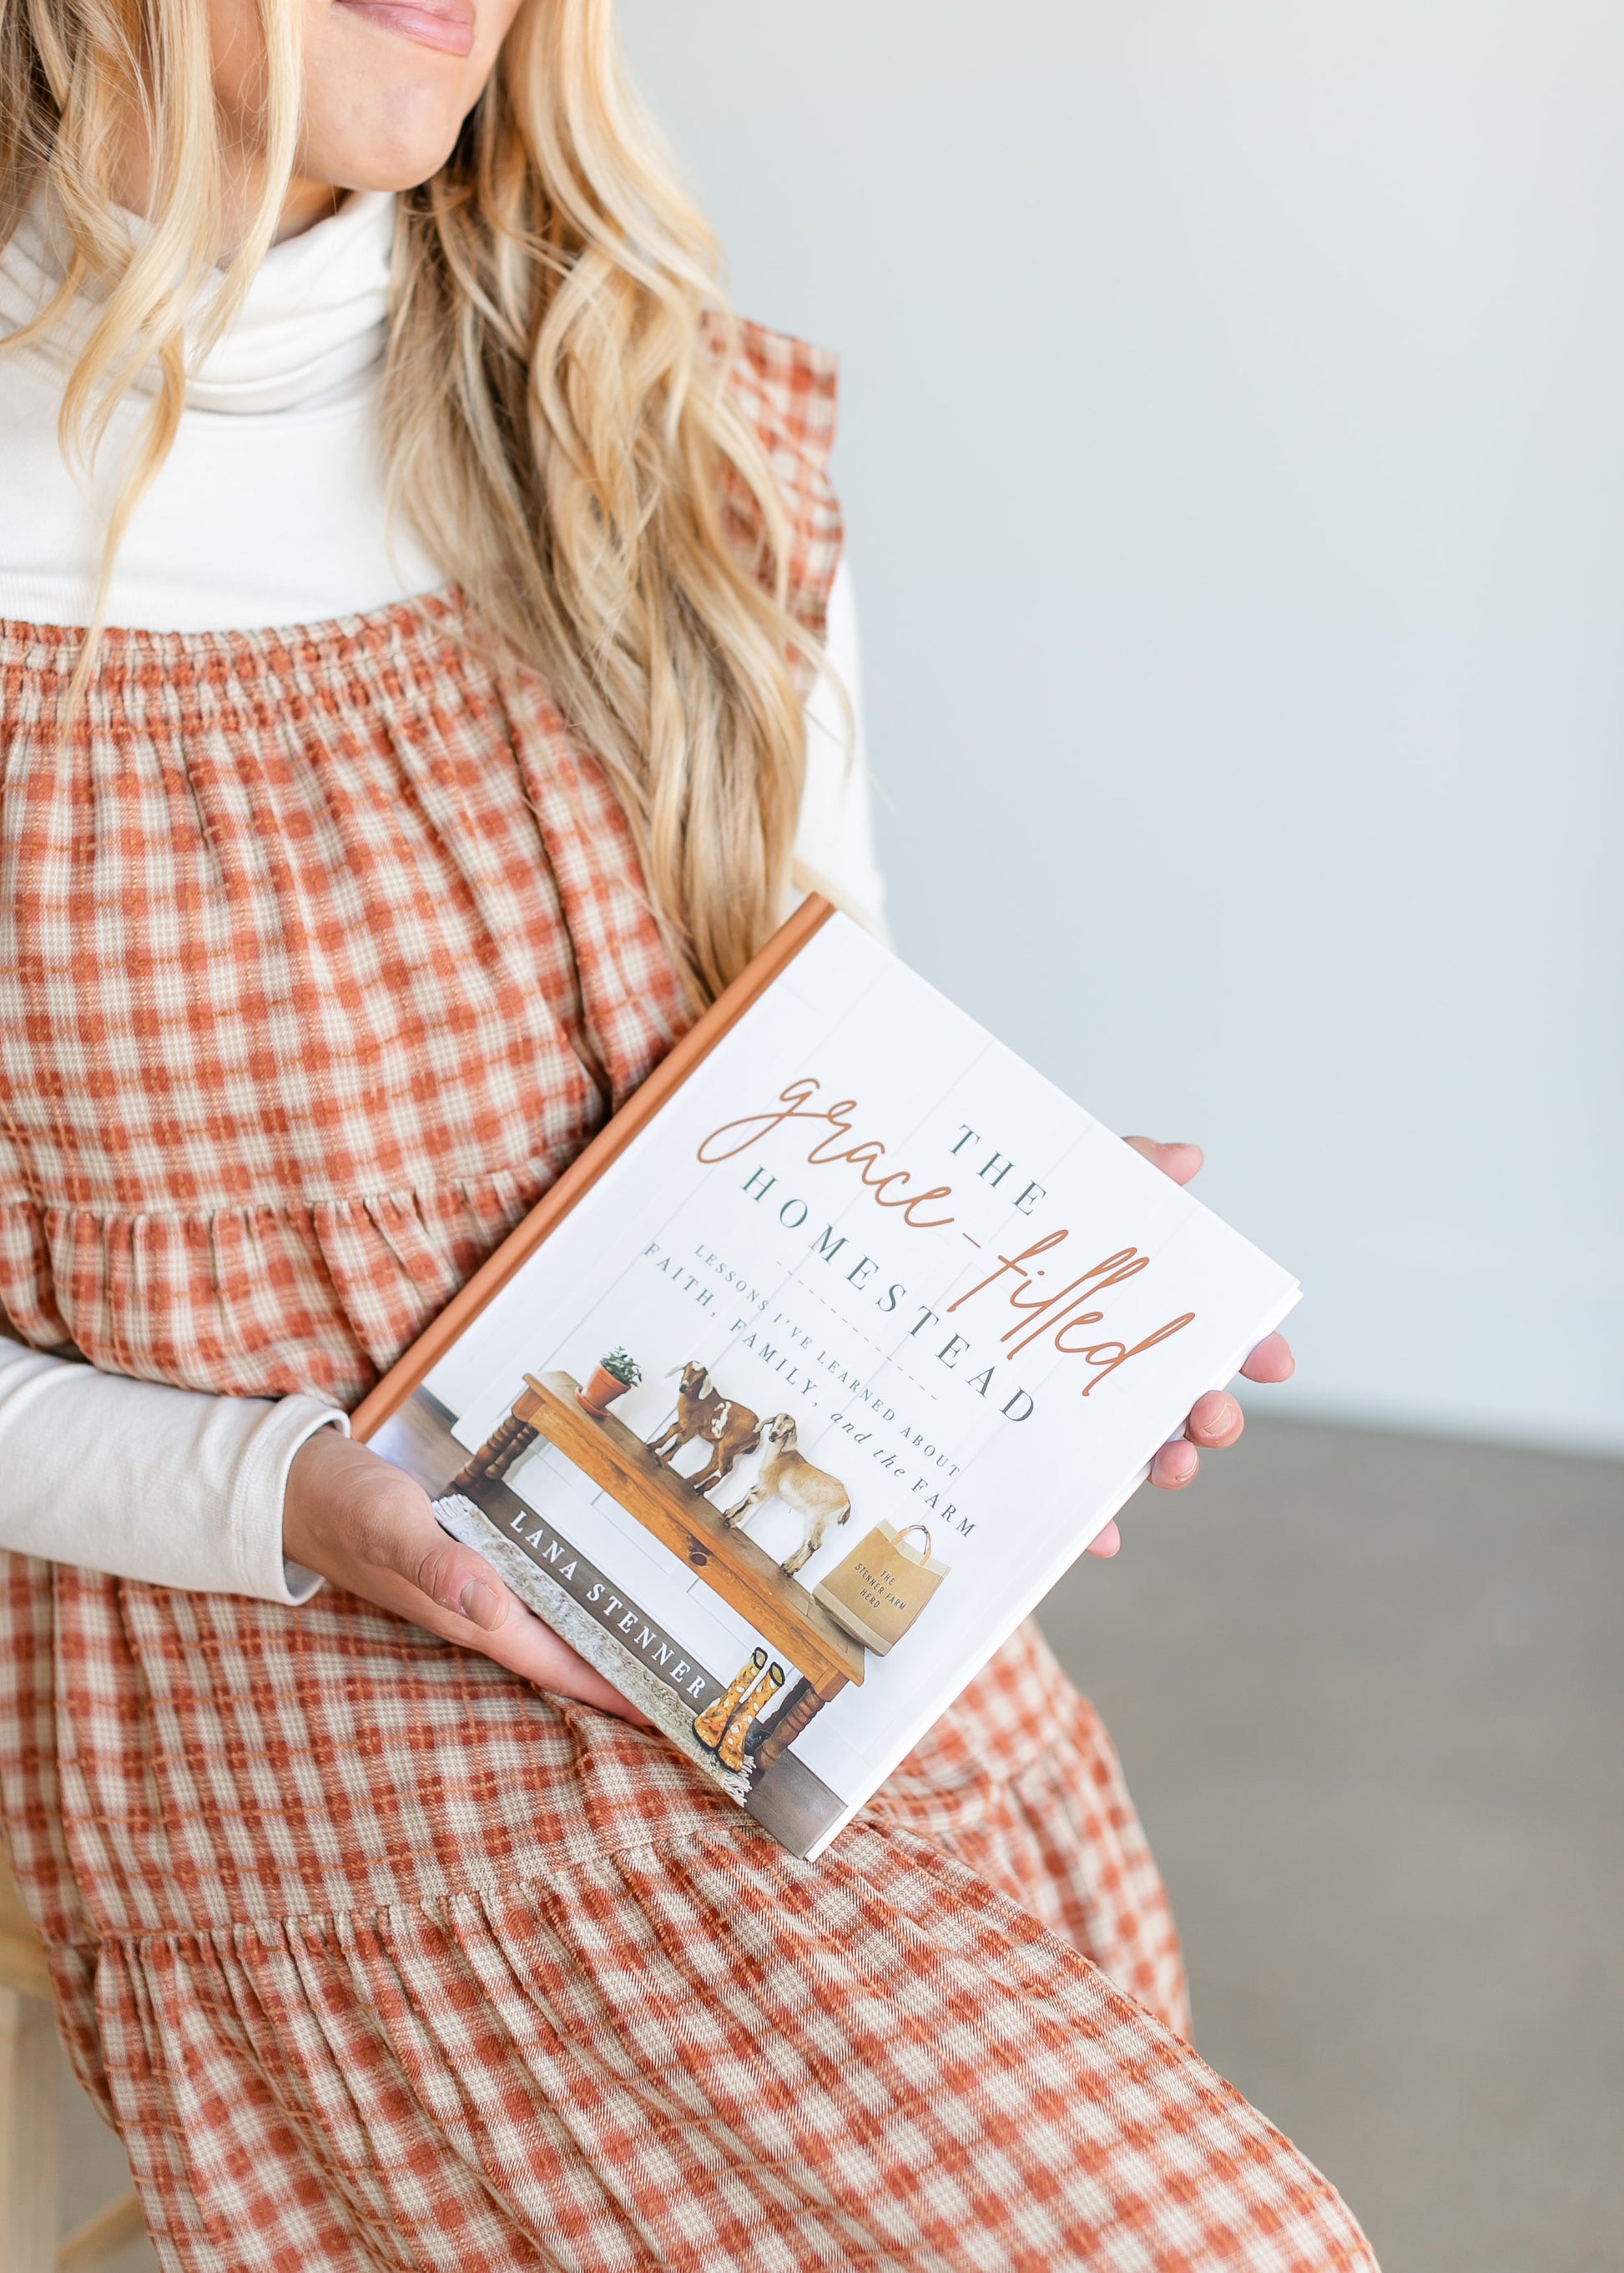 The Grace-Filled Homestead Book Gifts